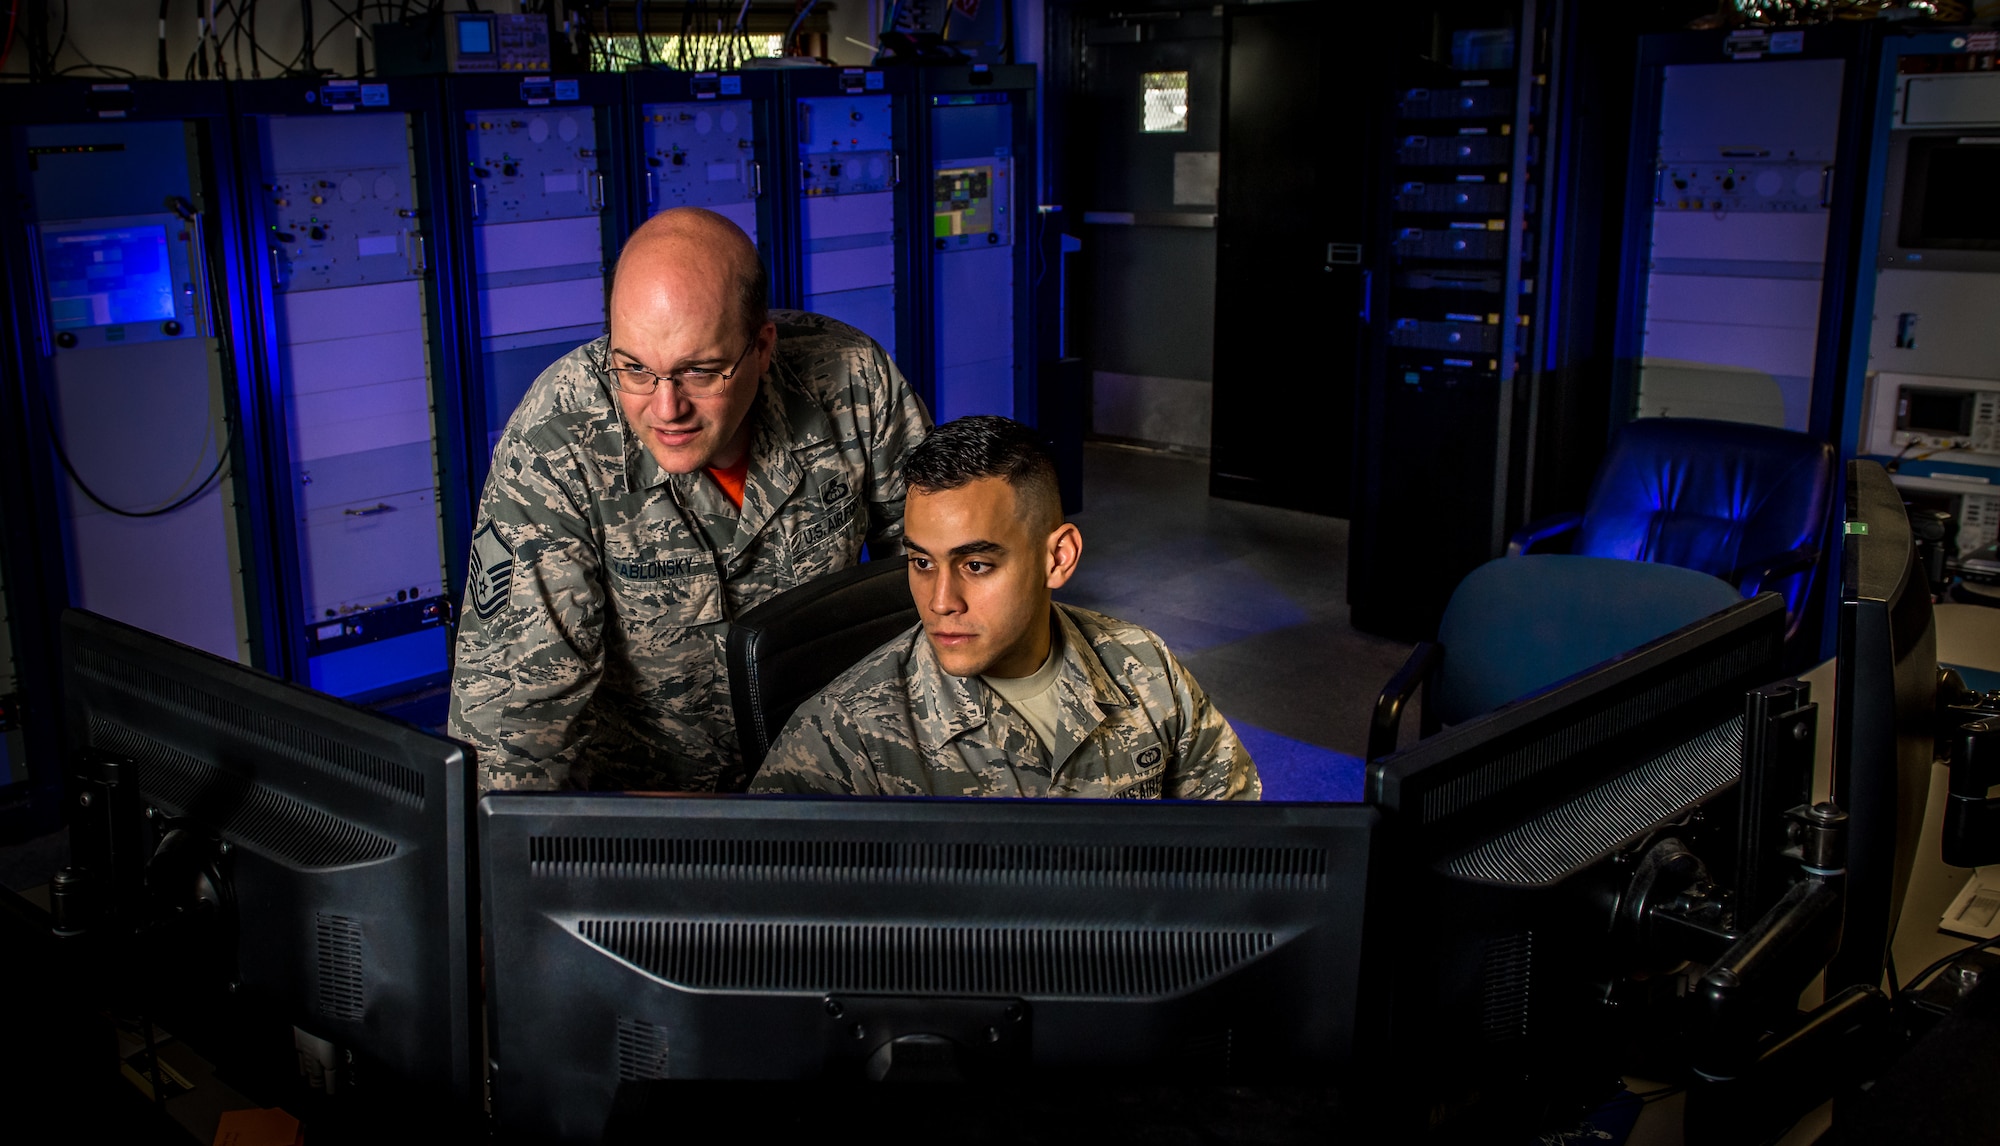 Master Sgt. Timothy Yablonsky, left, a space weather forecaster and detachment chief, and Senior Airman Zachary Lopez monitor radio signals emanating from the sun at the Sagamore Hill Solar Observatory of the 2nd Weather Squadron, Det. 2, in Hamilton, Mass., Jun. 1, 2018. The 2nd WS, headquartered at Offutt Air Force Base, Neb., operates four solar observatories around the globe which enable constant monitoring of the sun for solar phenomenon which may interfere with electronics and communications used by the Department of Defense. (U.S. Air Force photo by J.M. Eddins Jr.)